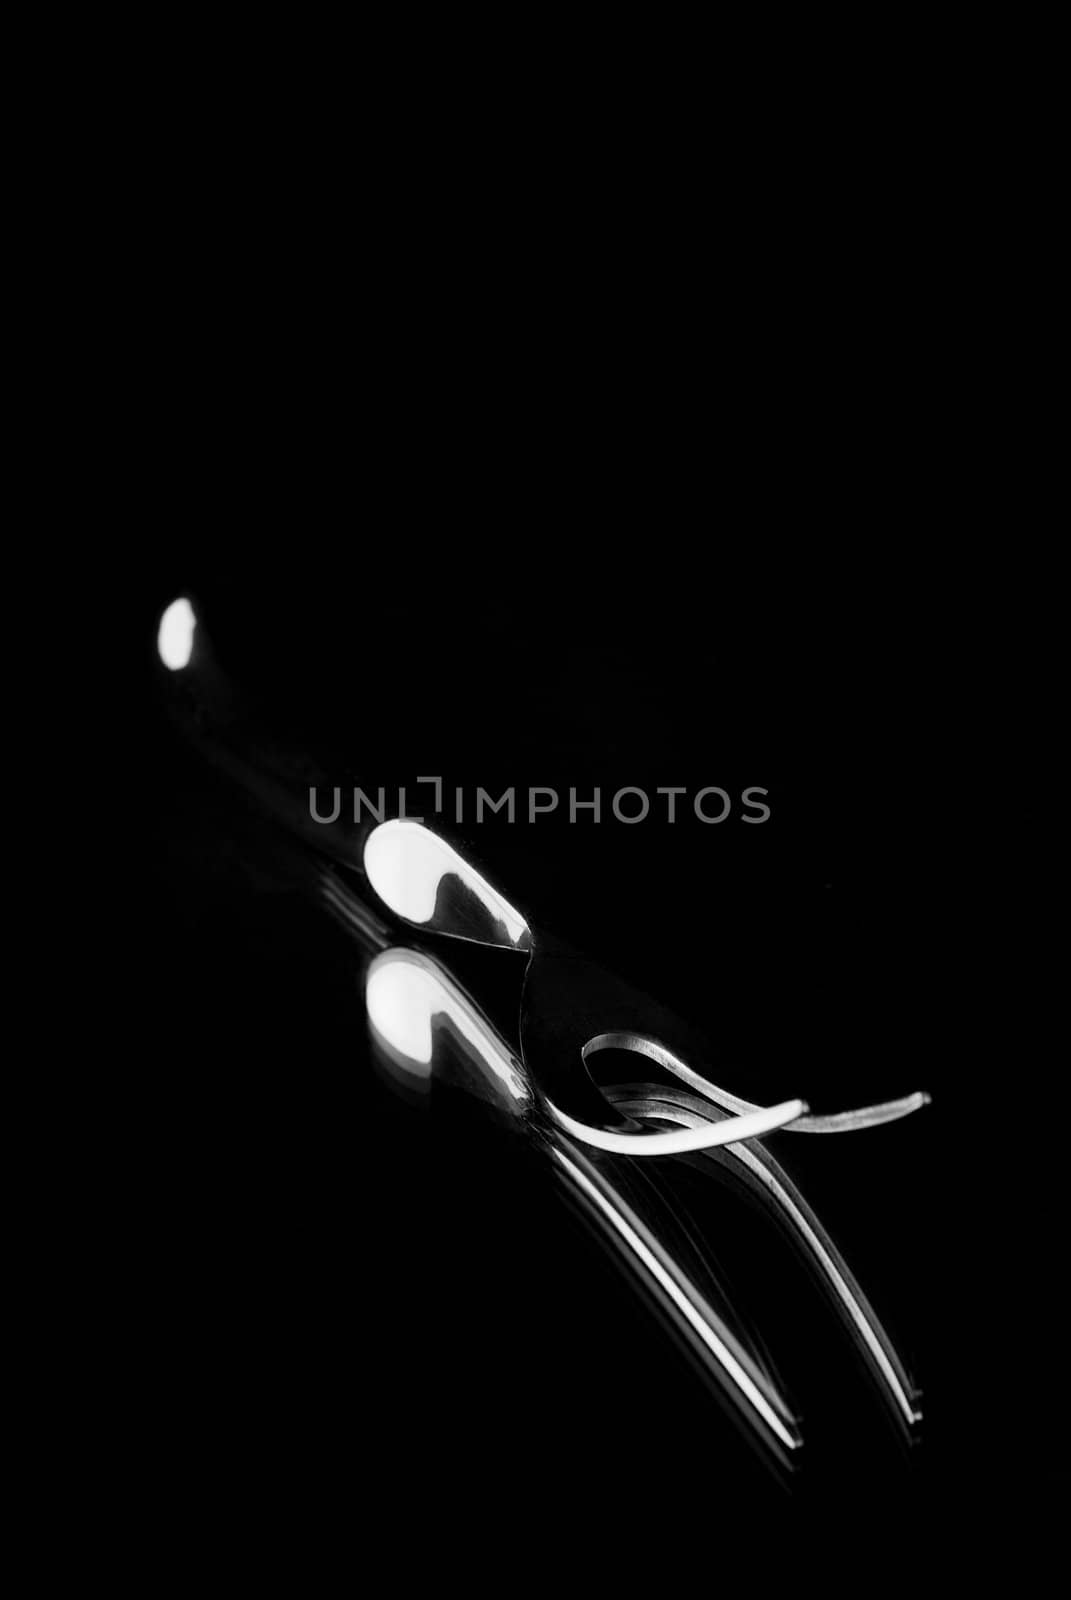 Single carving fork reflection on mirror with black background